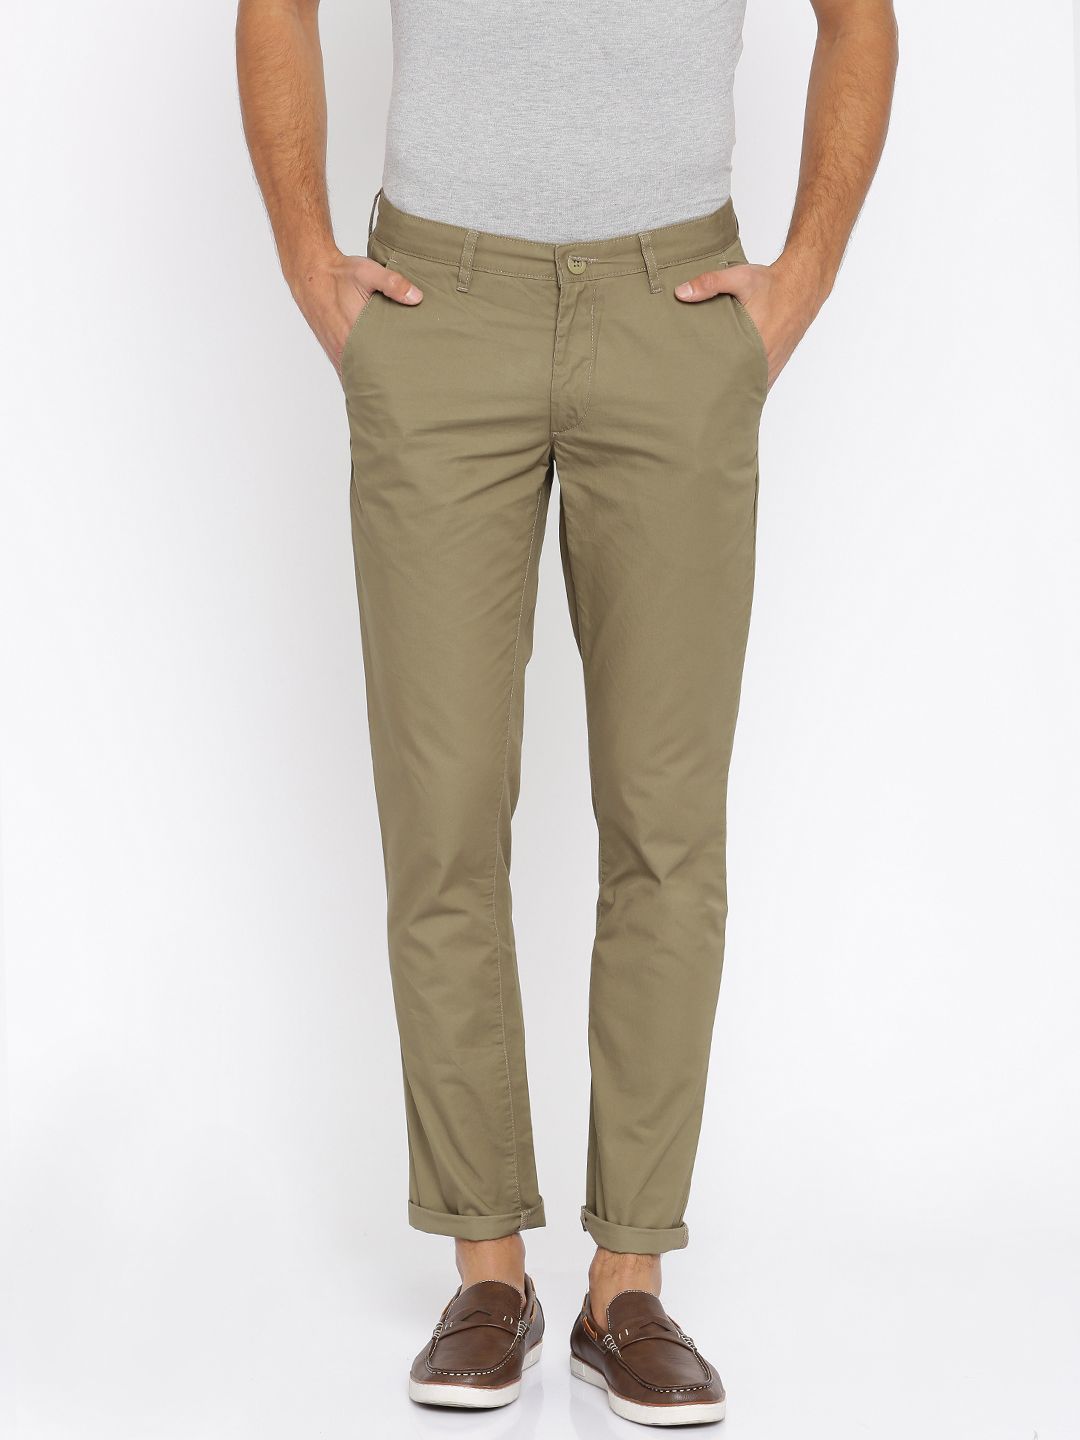 Buy Skinny Fit AnkleLength Chinos Online at Best Prices in India  JioMart